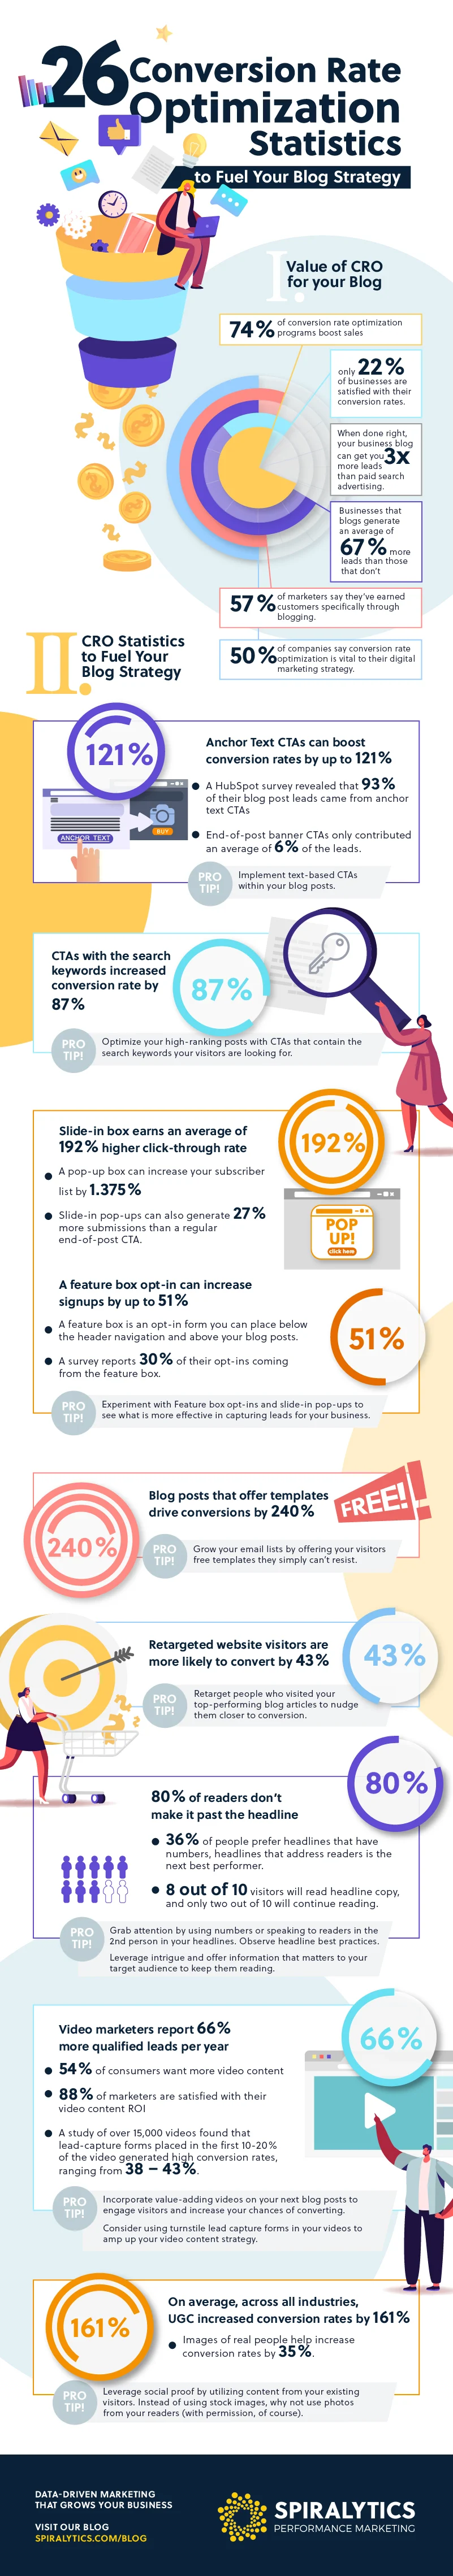 Infographic with stats to help improve blog conversion rates.